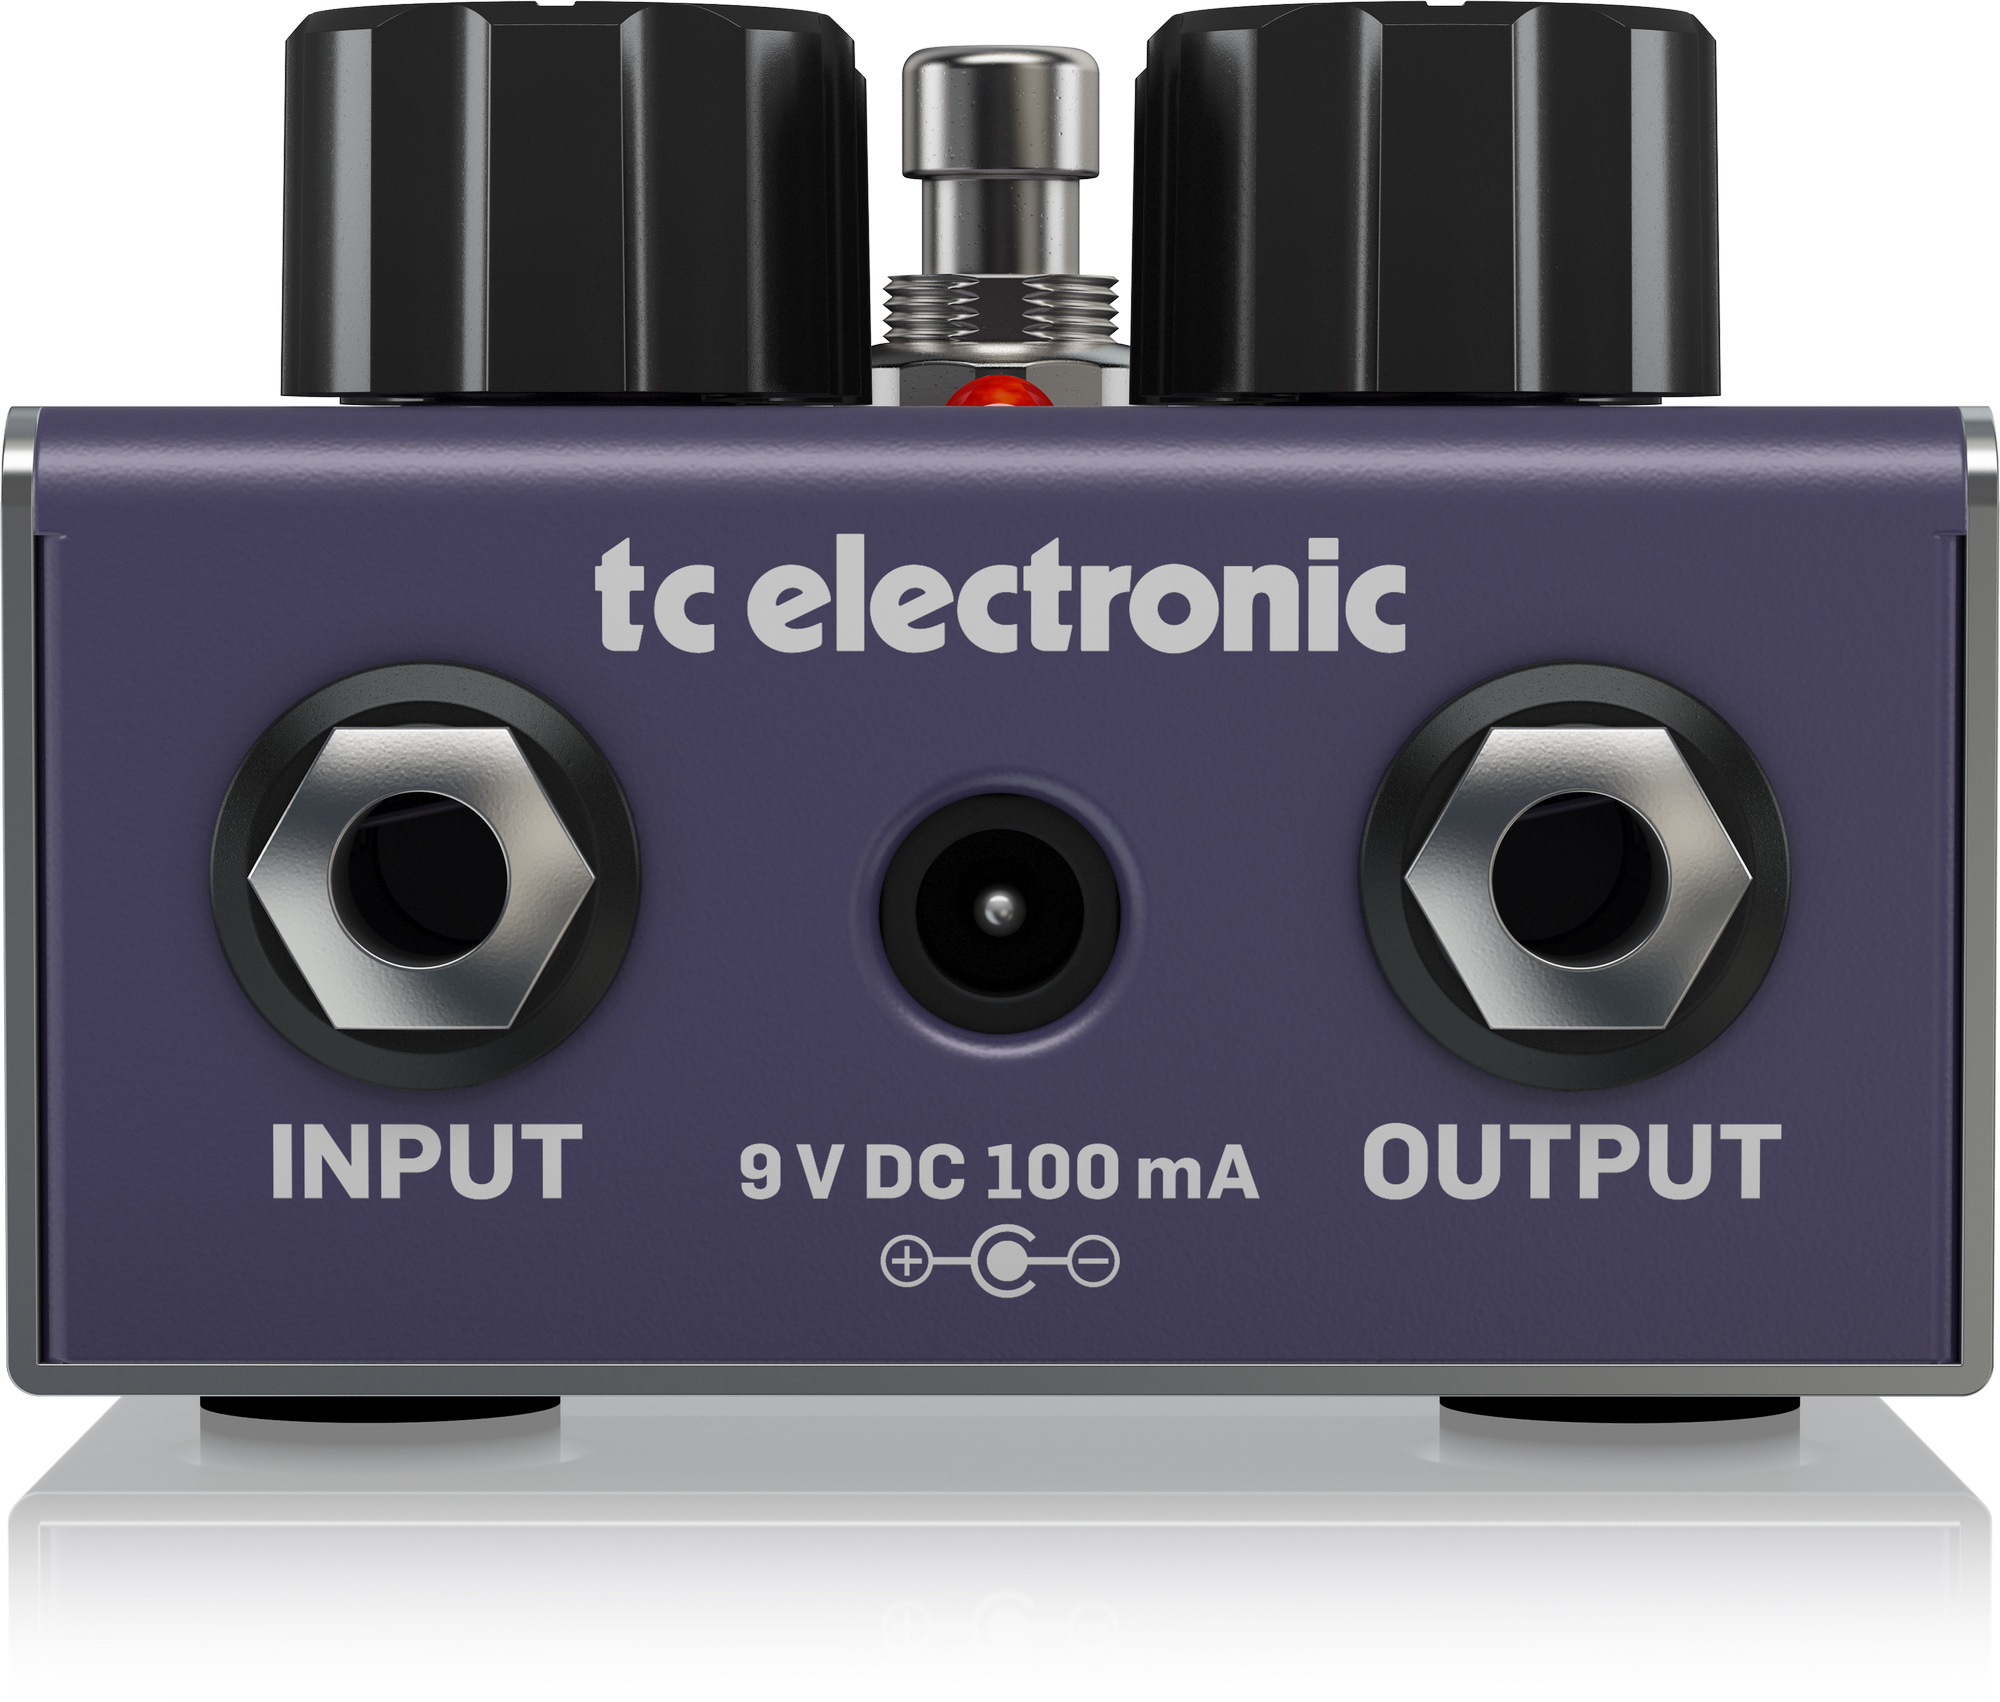 TC Electronic Thunderstorm Flanger Vintage-style Flanger Pedal With All-analog Bucket-brigade Circuit, TC ELECTRONIC, EFFECTS, tc-electronic-effects-tc-thunderstorm-flanger, ZOSO MUSIC SDN BHD